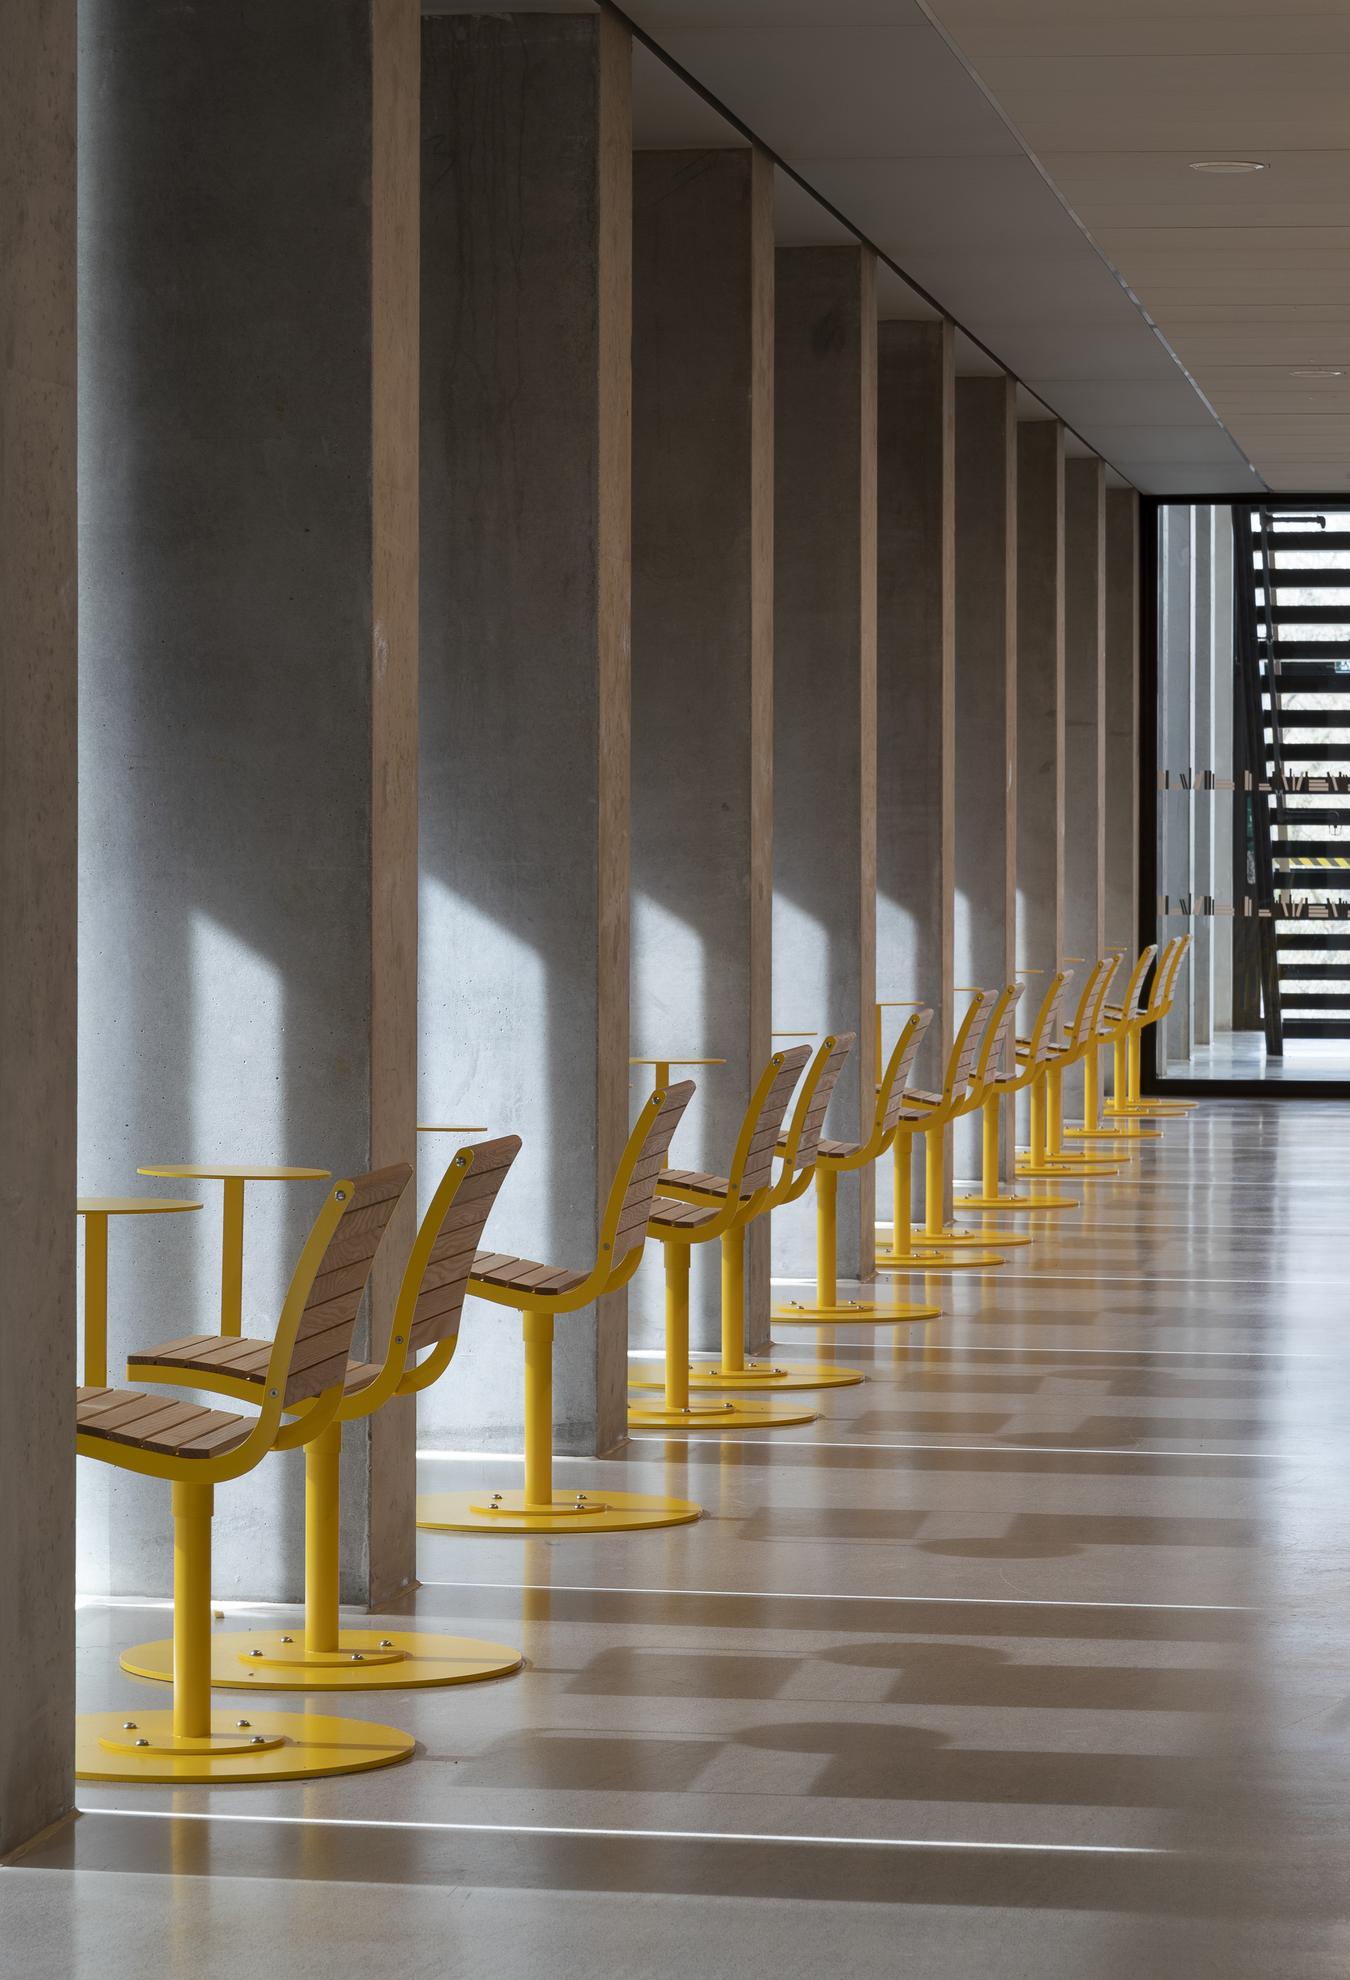 Hallway with concrete columns and yellow chairs. Photo